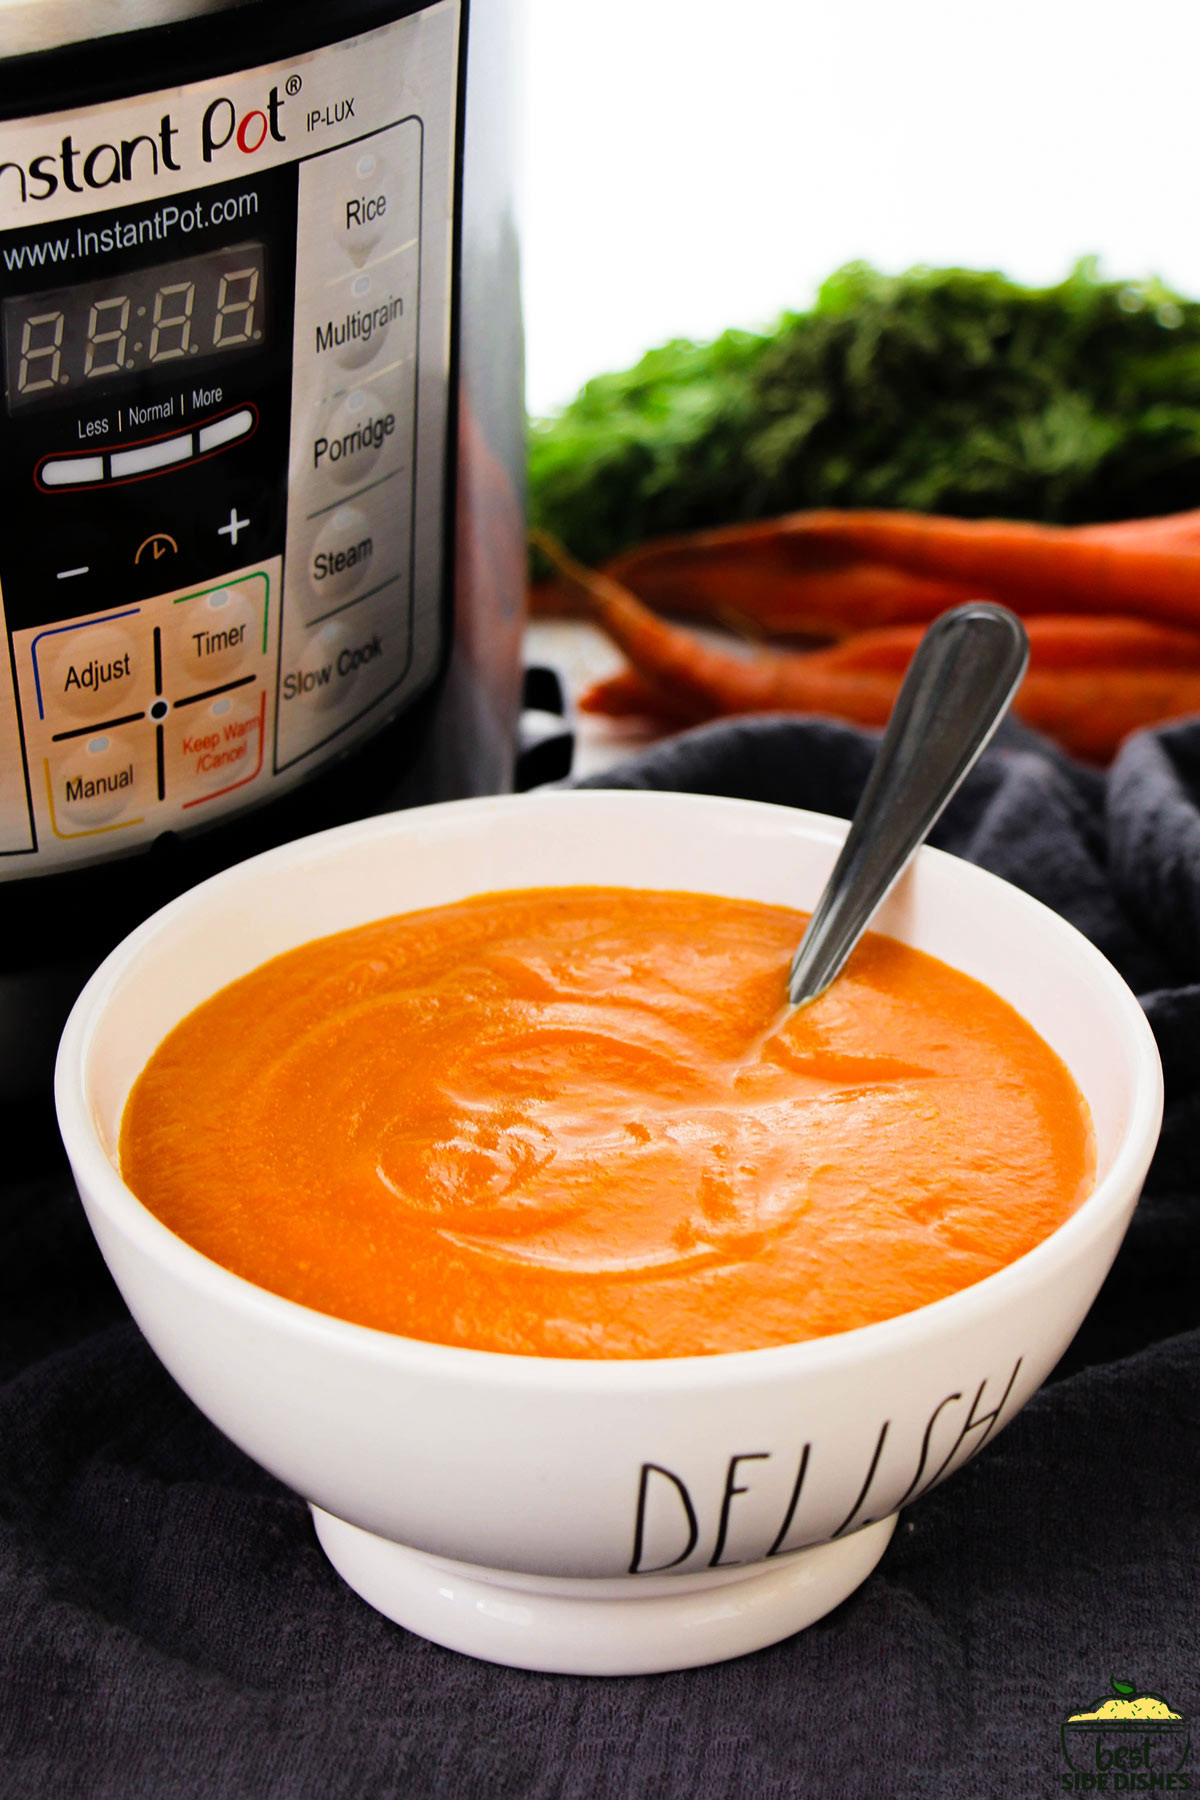 a full bowl of carrot soup next to an instant pot and a bunch of carrots.